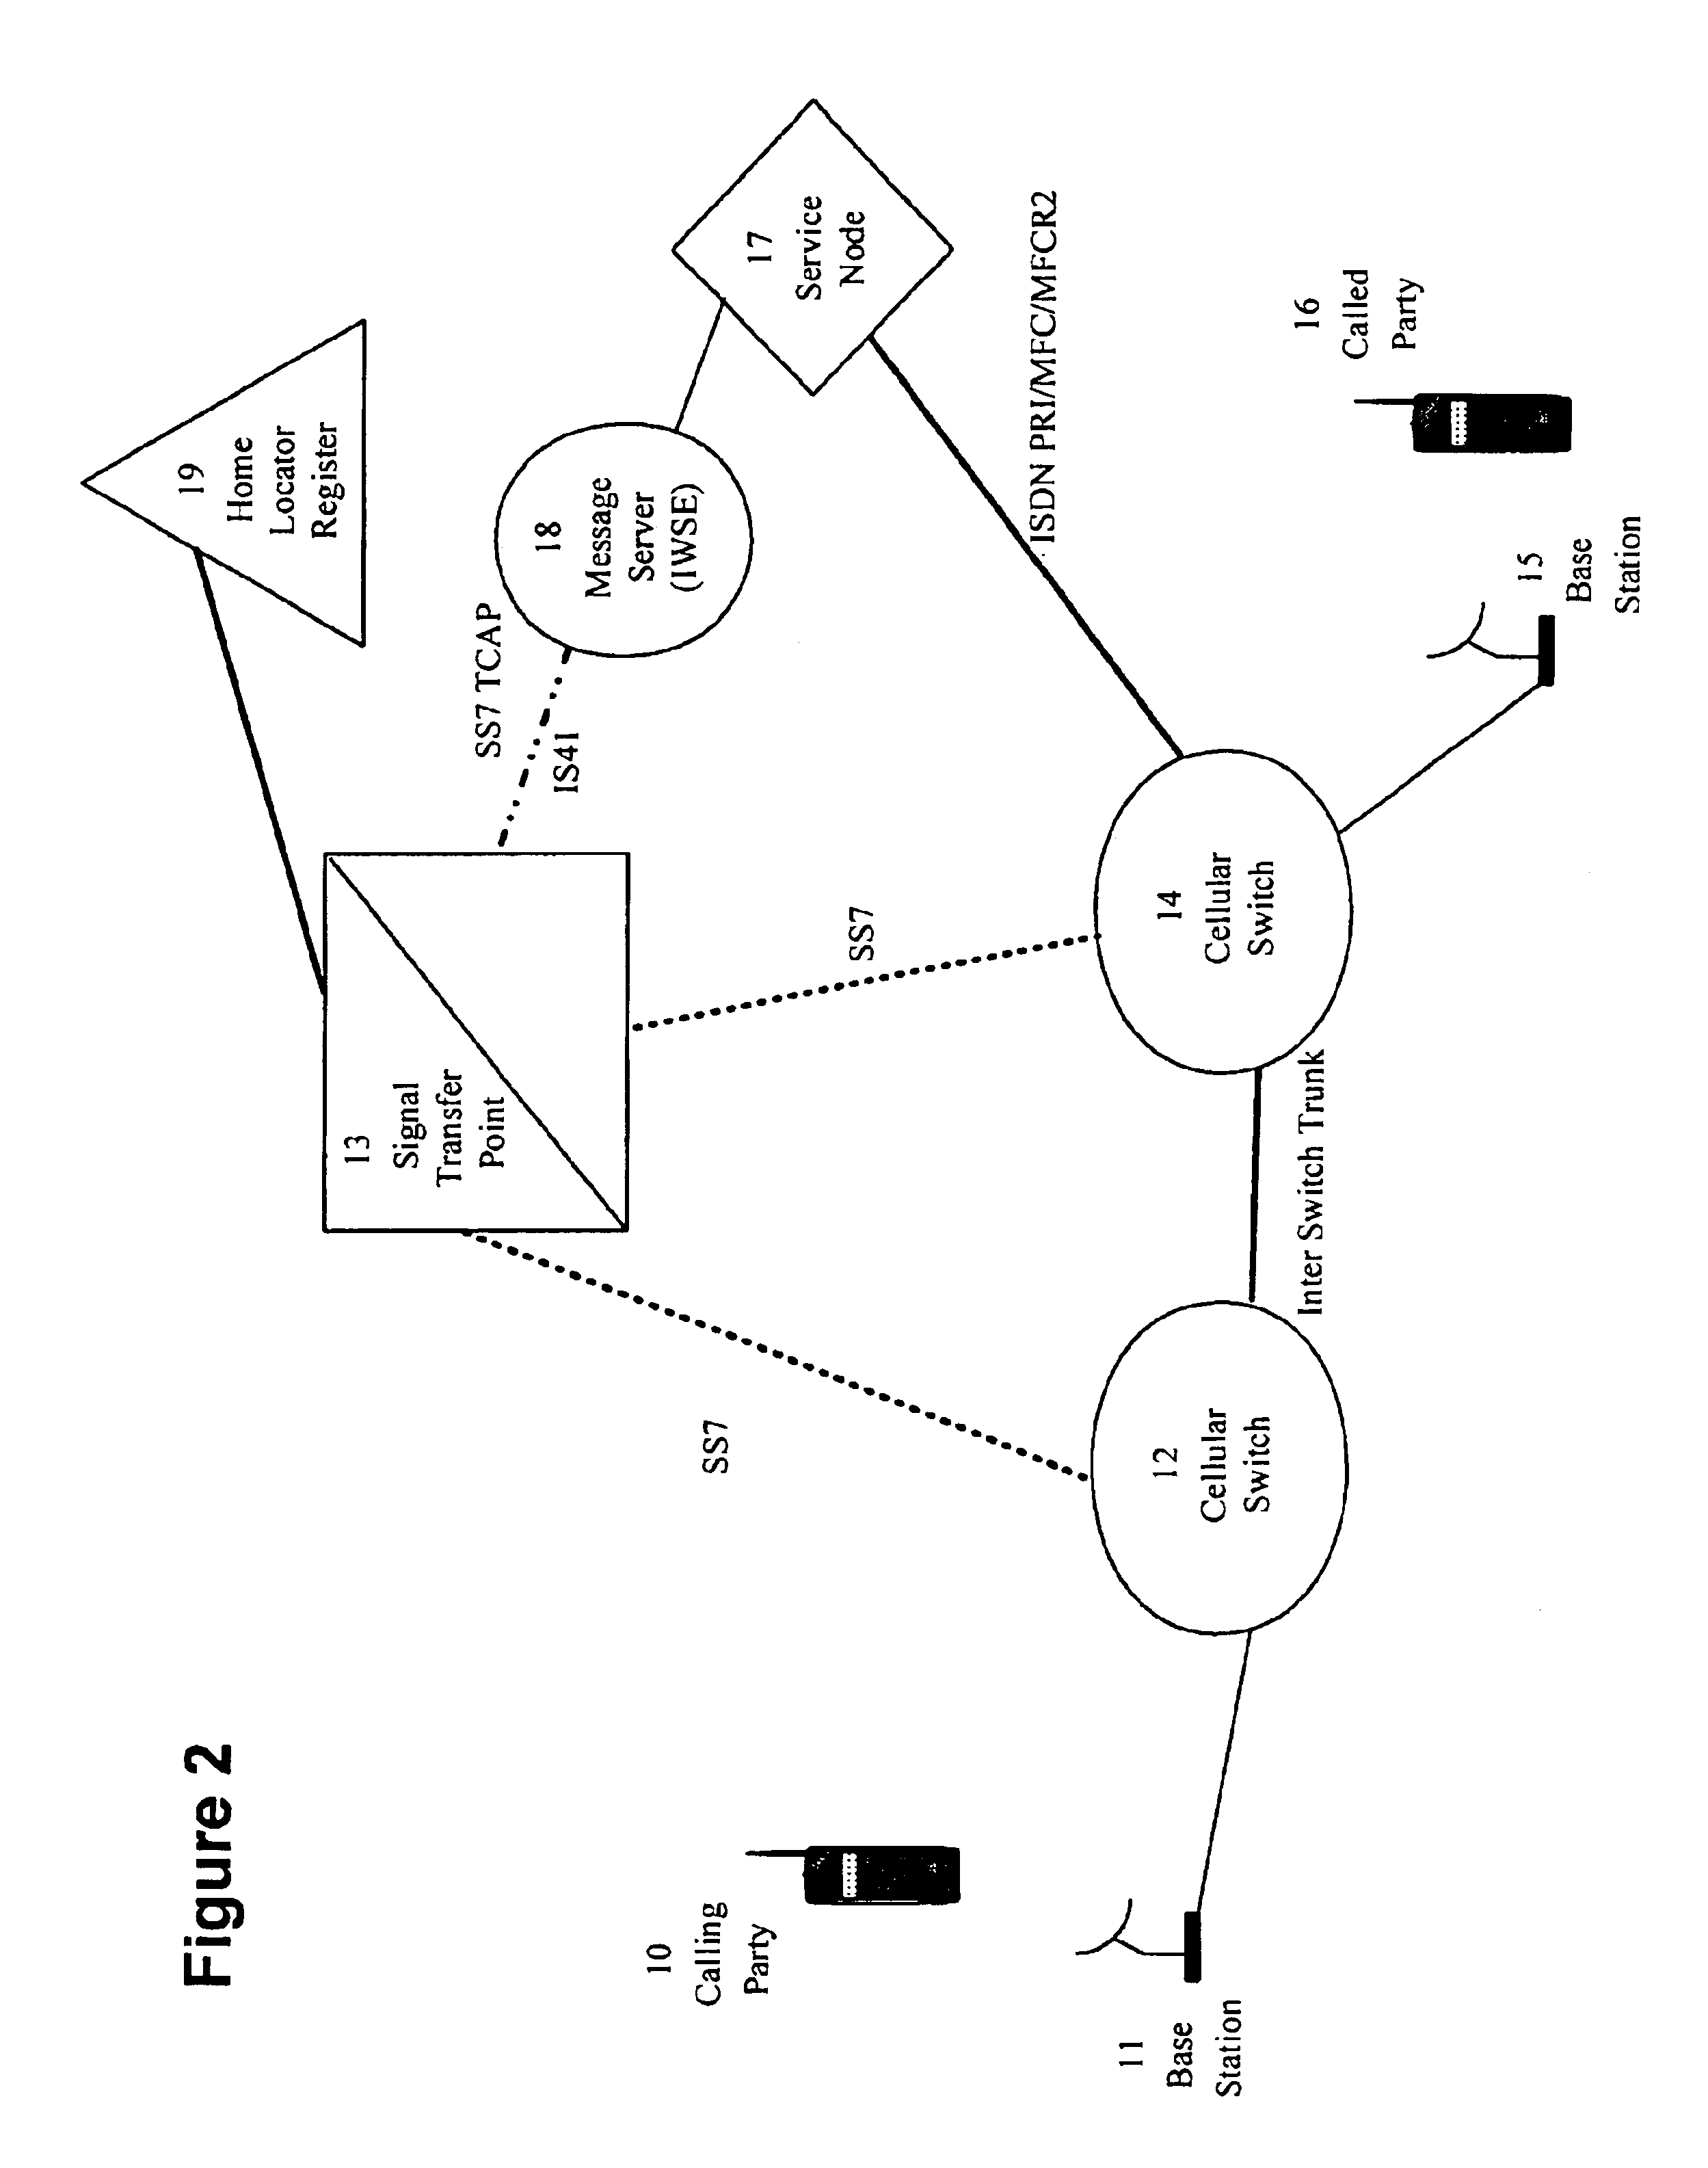 Method and apparatus to enable enhanced services of an intelligent telephone network in a wireless environment